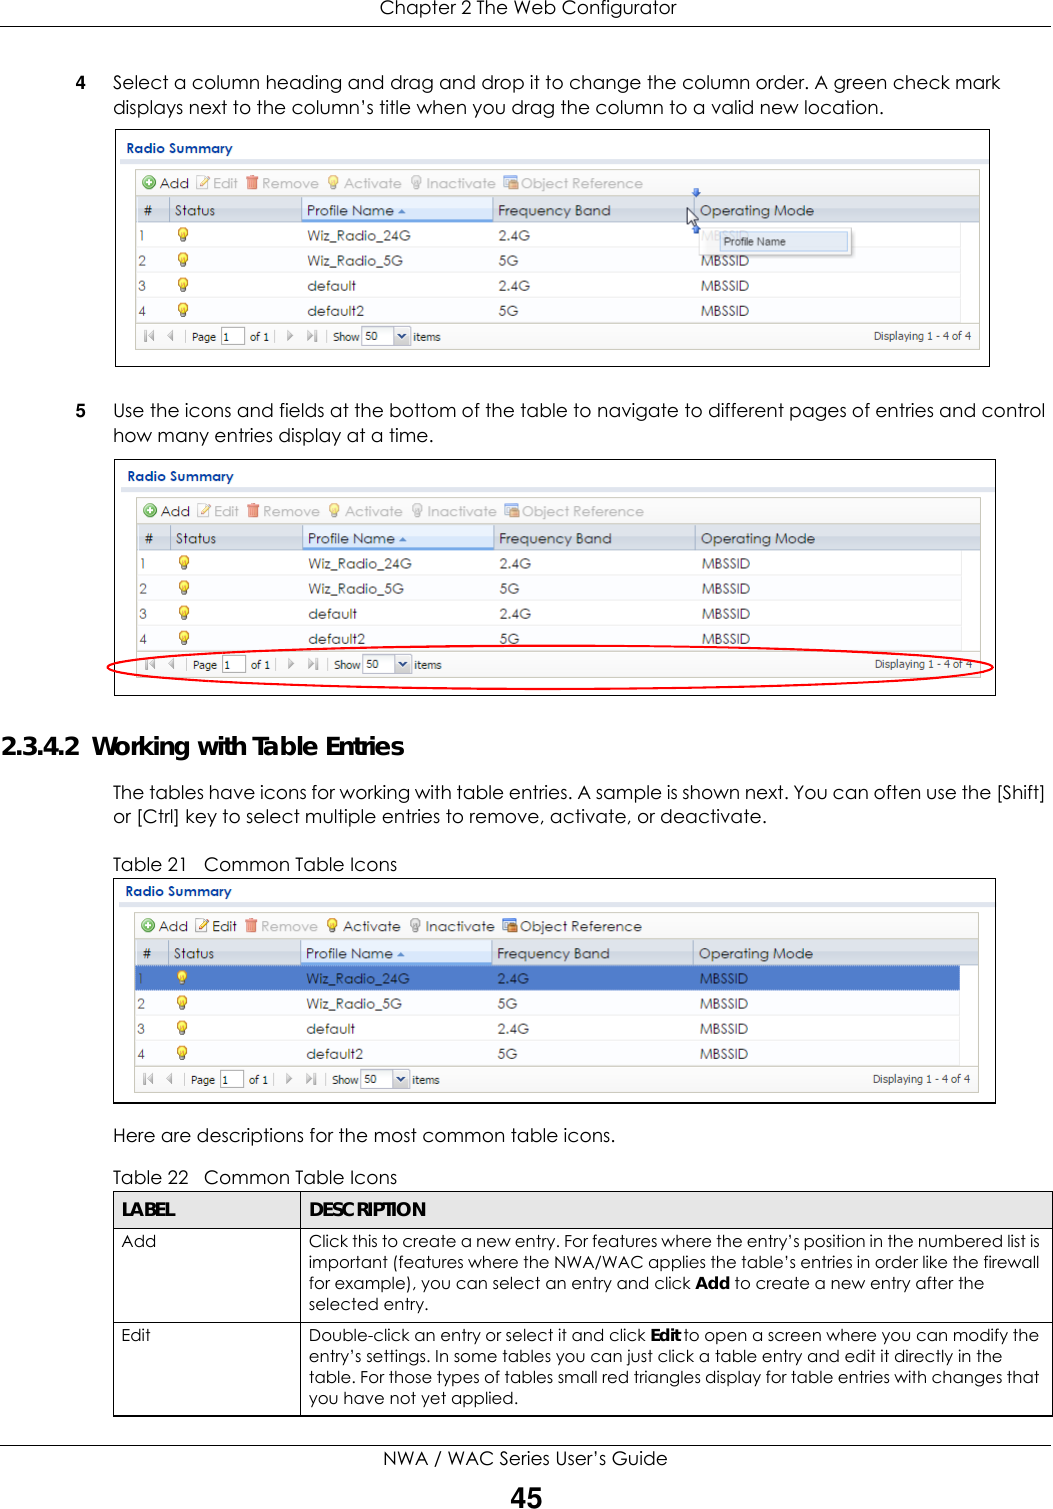  Chapter 2 The Web ConfiguratorNWA / WAC Series User’s Guide454Select a column heading and drag and drop it to change the column order. A green check mark displays next to the column’s title when you drag the column to a valid new location.  5Use the icons and fields at the bottom of the table to navigate to different pages of entries and control how many entries display at a time. 2.3.4.2  Working with Table EntriesThe tables have icons for working with table entries. A sample is shown next. You can often use the [Shift] or [Ctrl] key to select multiple entries to remove, activate, or deactivate. Table 21   Common Table IconsHere are descriptions for the most common table icons.Table 22   Common Table IconsLABEL DESCRIPTIONAdd Click this to create a new entry. For features where the entry’s position in the numbered list is important (features where the NWA/WAC applies the table’s entries in order like the firewall for example), you can select an entry and click Add to create a new entry after the selected entry.Edit Double-click an entry or select it and click Edit to open a screen where you can modify the entry’s settings. In some tables you can just click a table entry and edit it directly in the table. For those types of tables small red triangles display for table entries with changes that you have not yet applied.